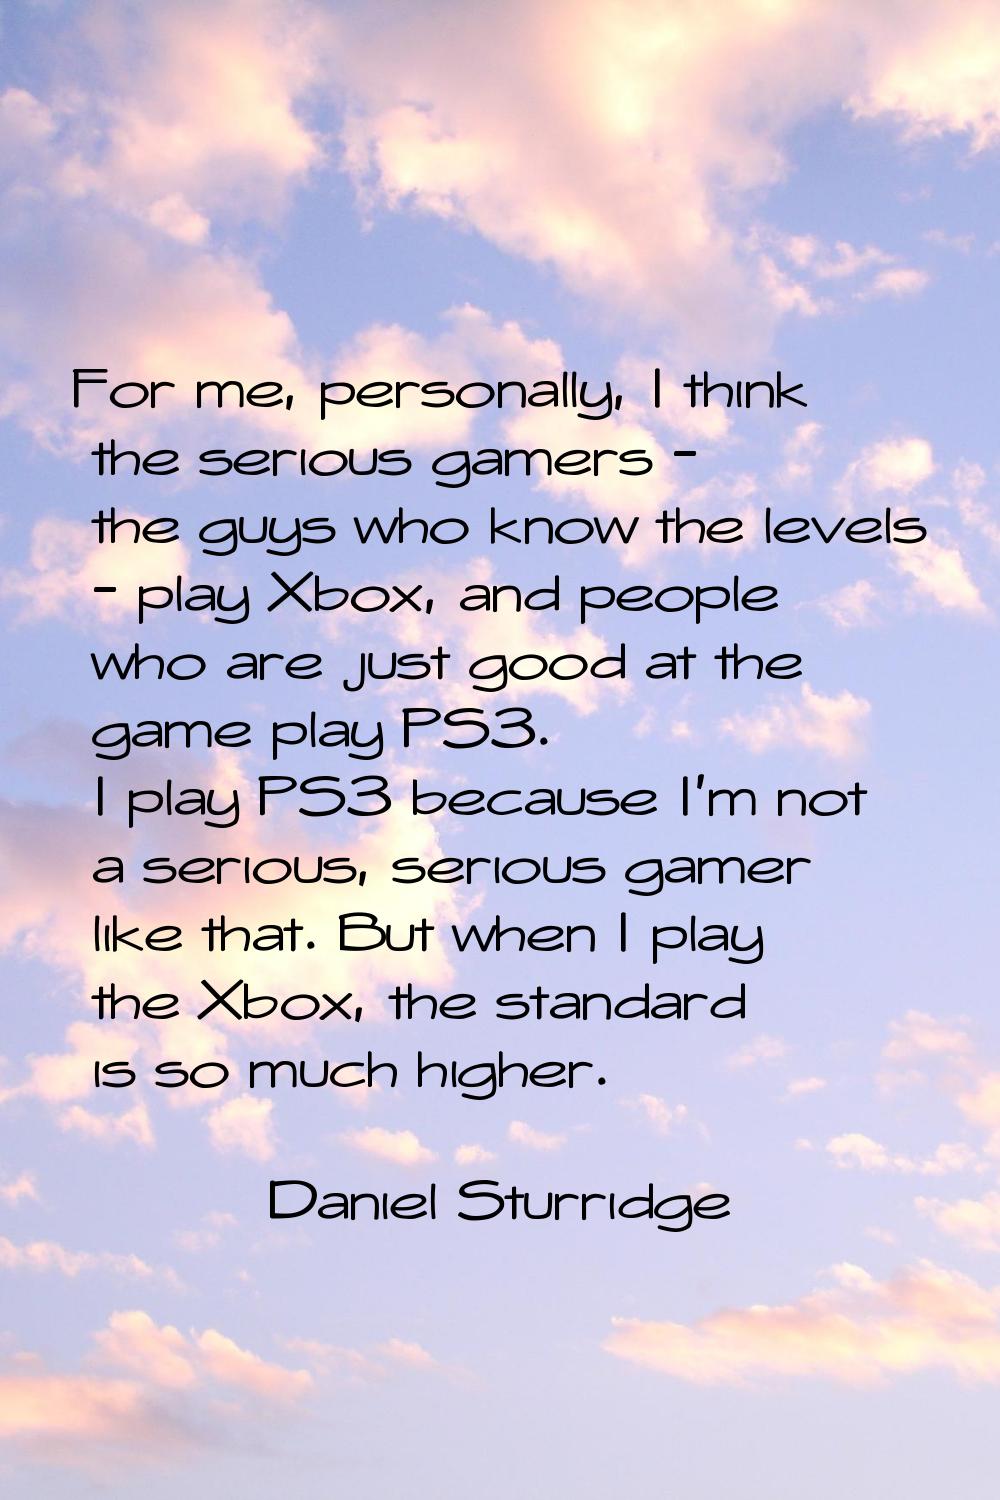 For me, personally, I think the serious gamers - the guys who know the levels - play Xbox, and peop